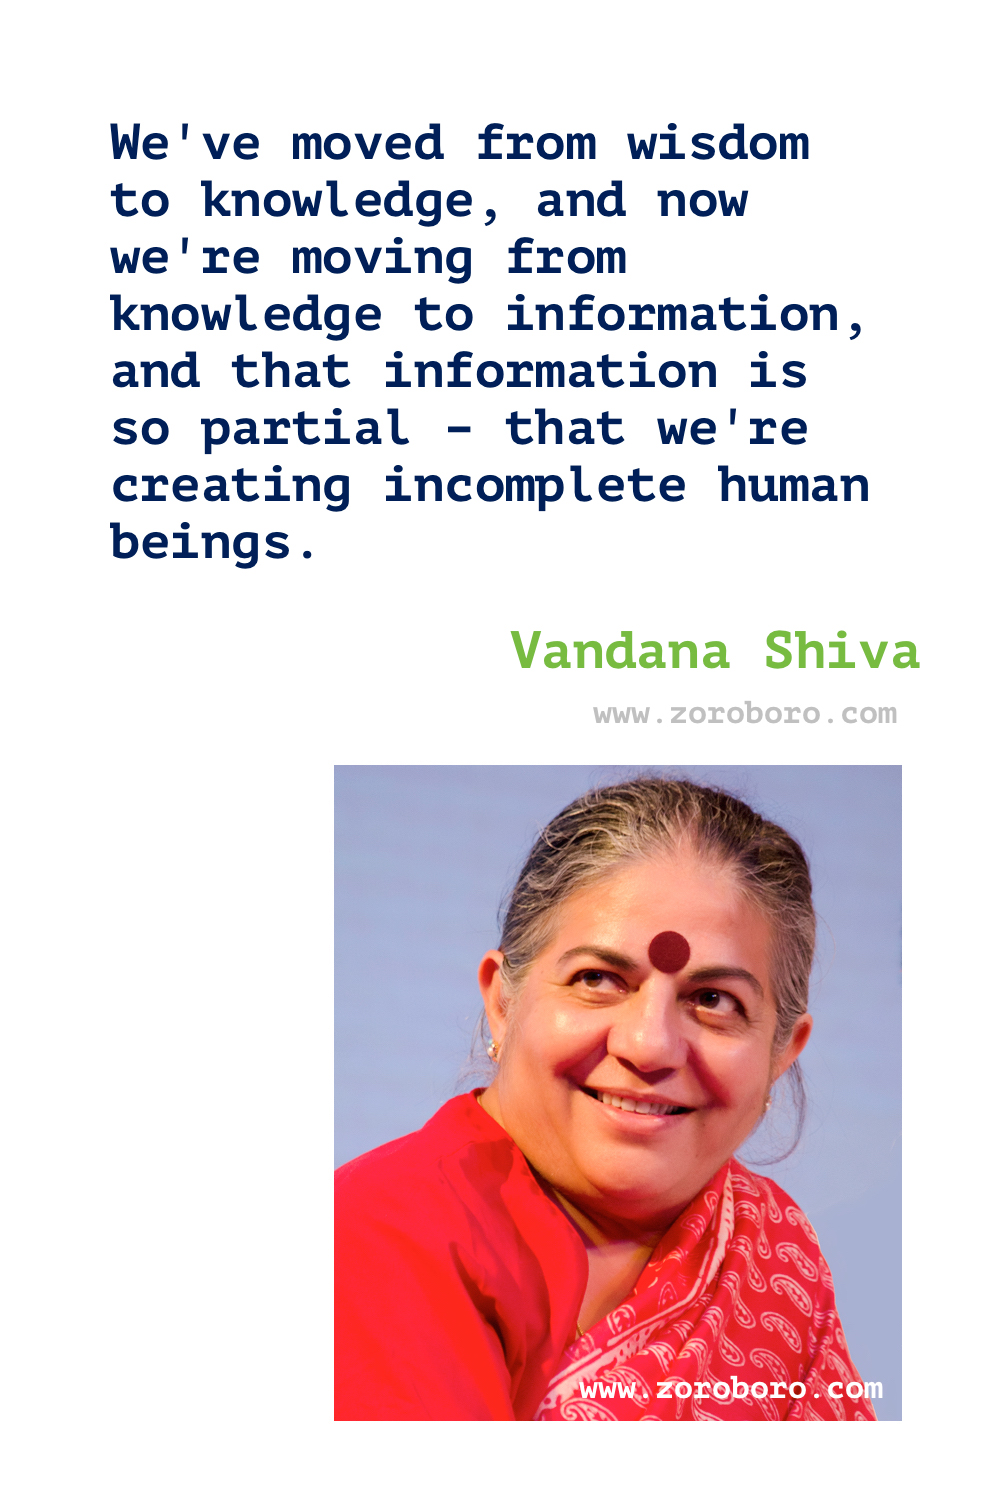 Vandana Shiva Quotes. Vandana Shiva on Environment Quotes, Agriculture Quotes, Nature Quotes, Earth Quotes, Democracy Quotes & Soil Quotes. Vandana Shiva Quotes,Biodiversity,Conservation,Country,Culture,Democracy,Diversity,Drinking,Earth,Ecology,Economy,Energy,Fathers,Giving,Globalization,Growth,Healing,Home,Humanity,Innovation,Justice,Mothers,Physics,Property,Responsibility,Royalty,Survival,Sustainability,Today,Trade,Violence,War,Water,Wilderness